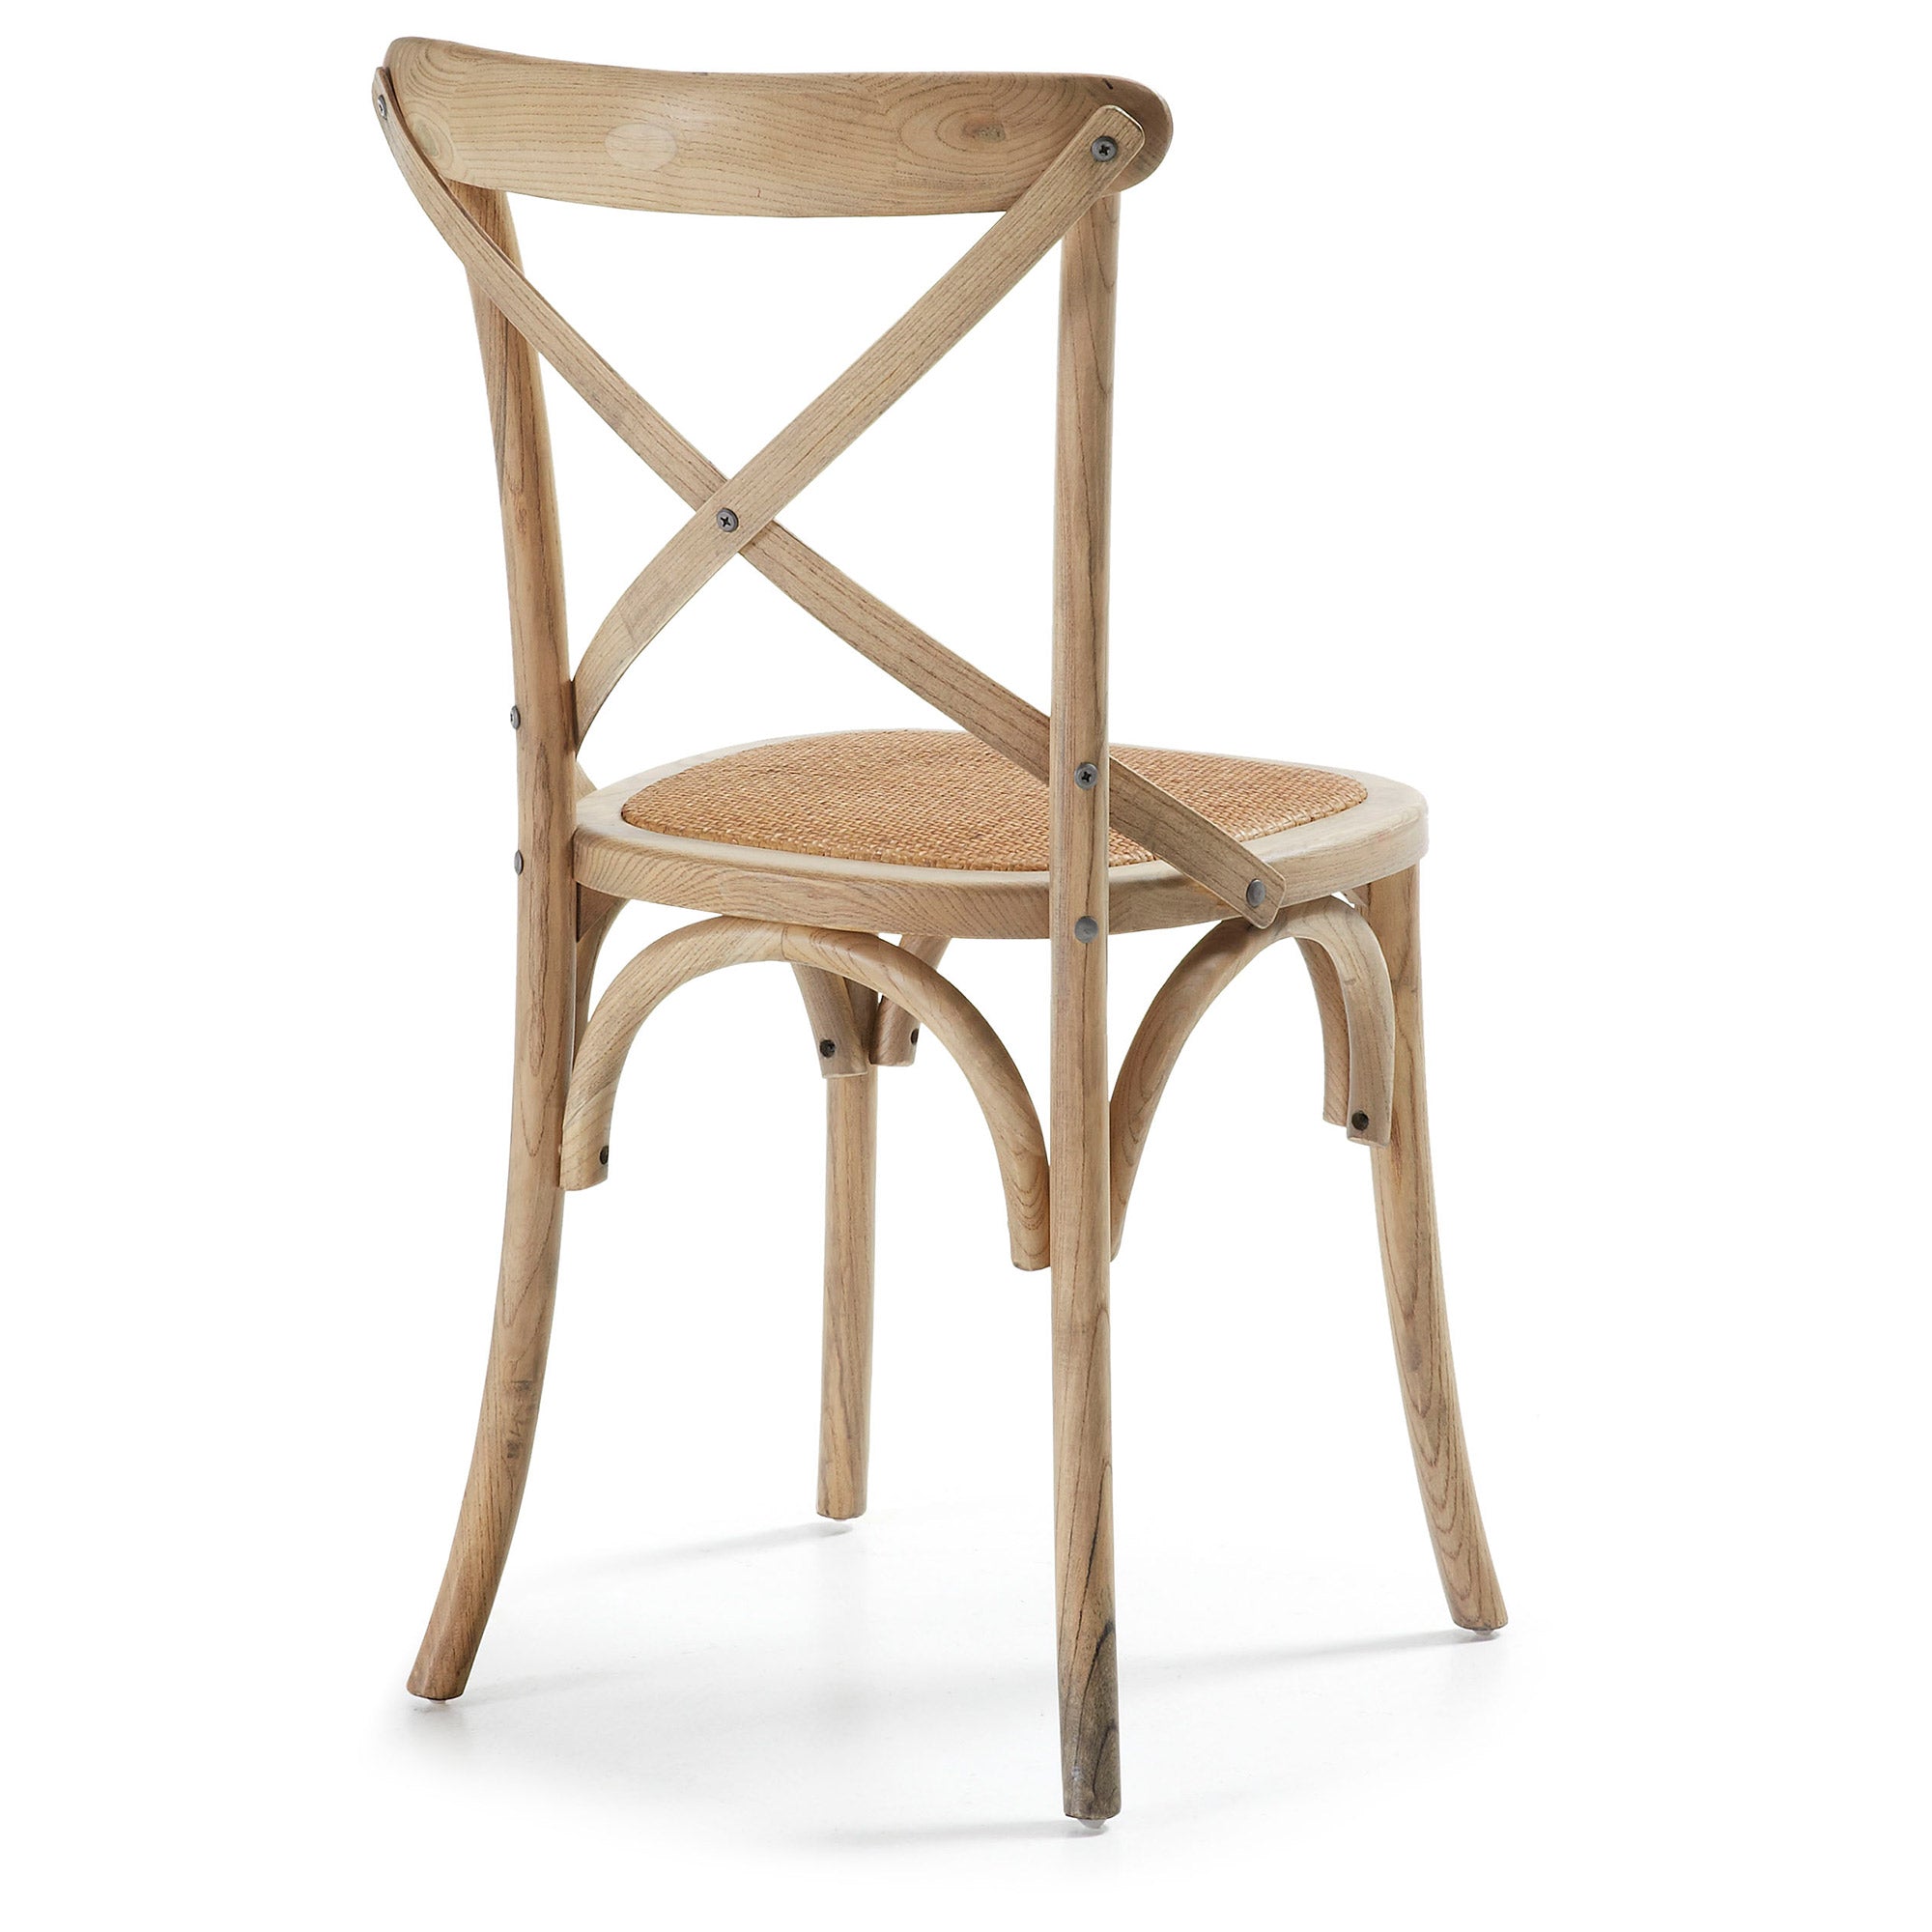 Alsie chair in solid birch wood with natural lacquer